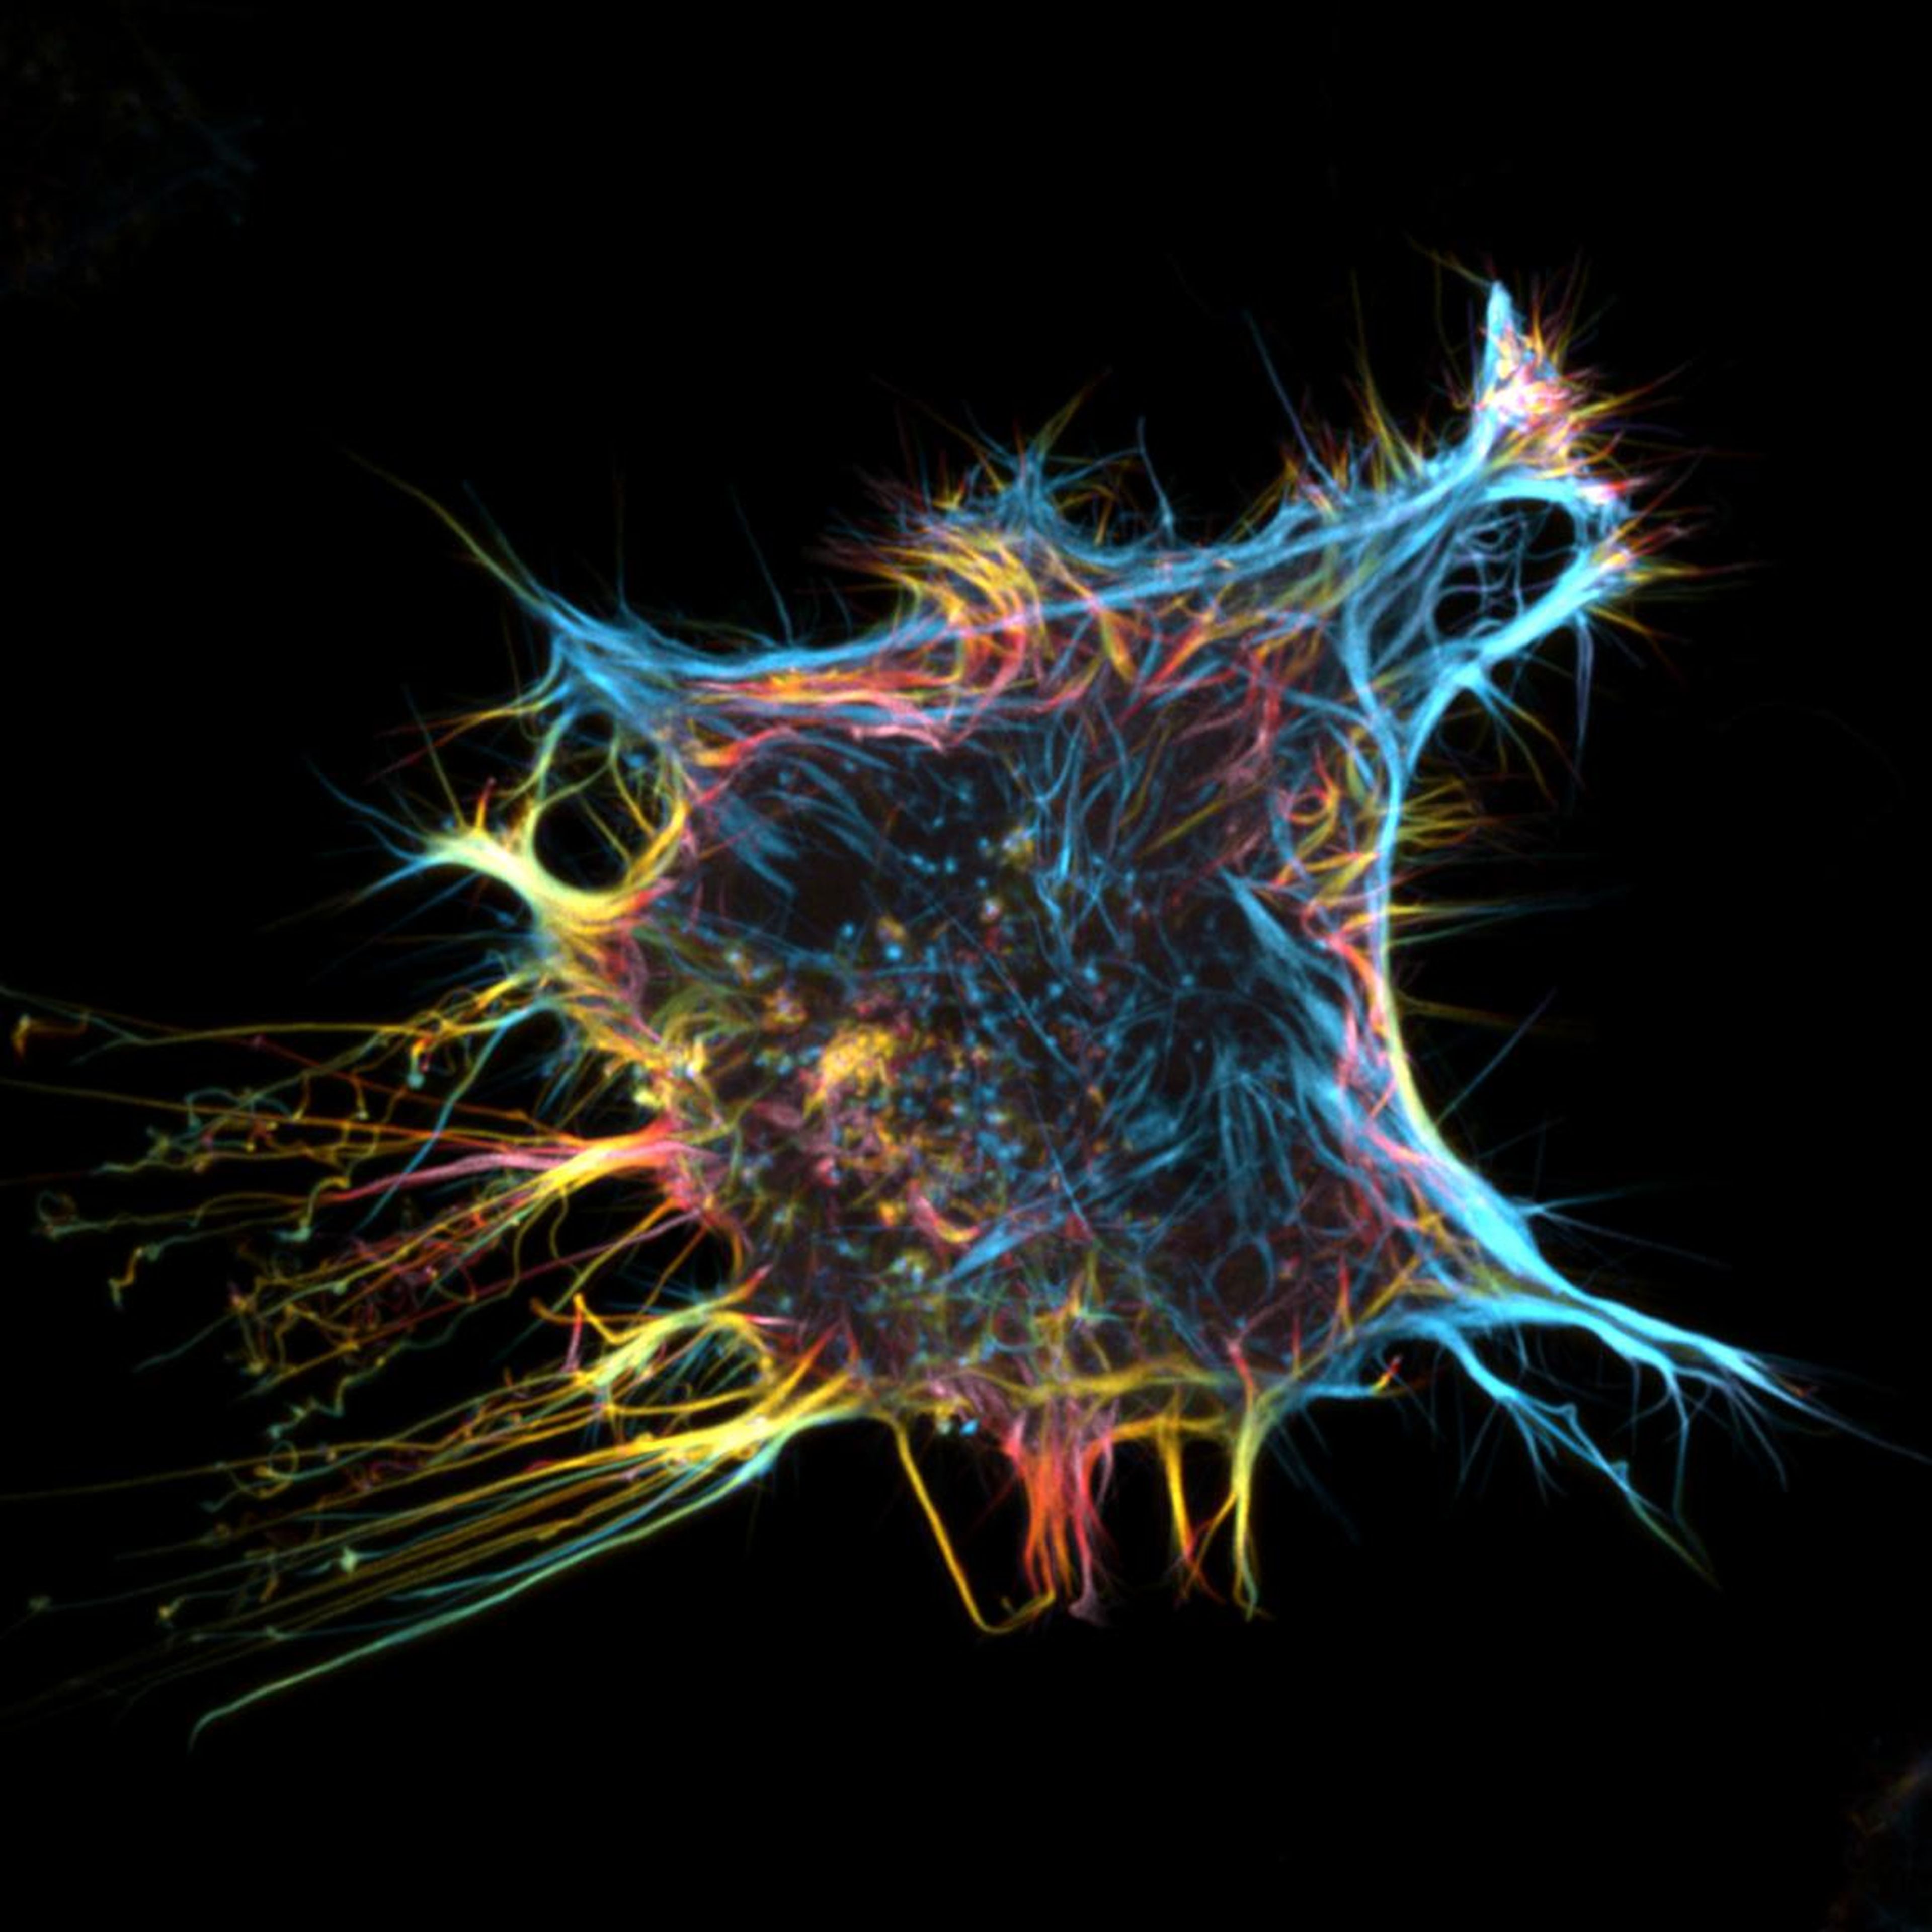 Fluorescent protein in a living HeLa cell, which is the oldest human cell line used in scientific research.